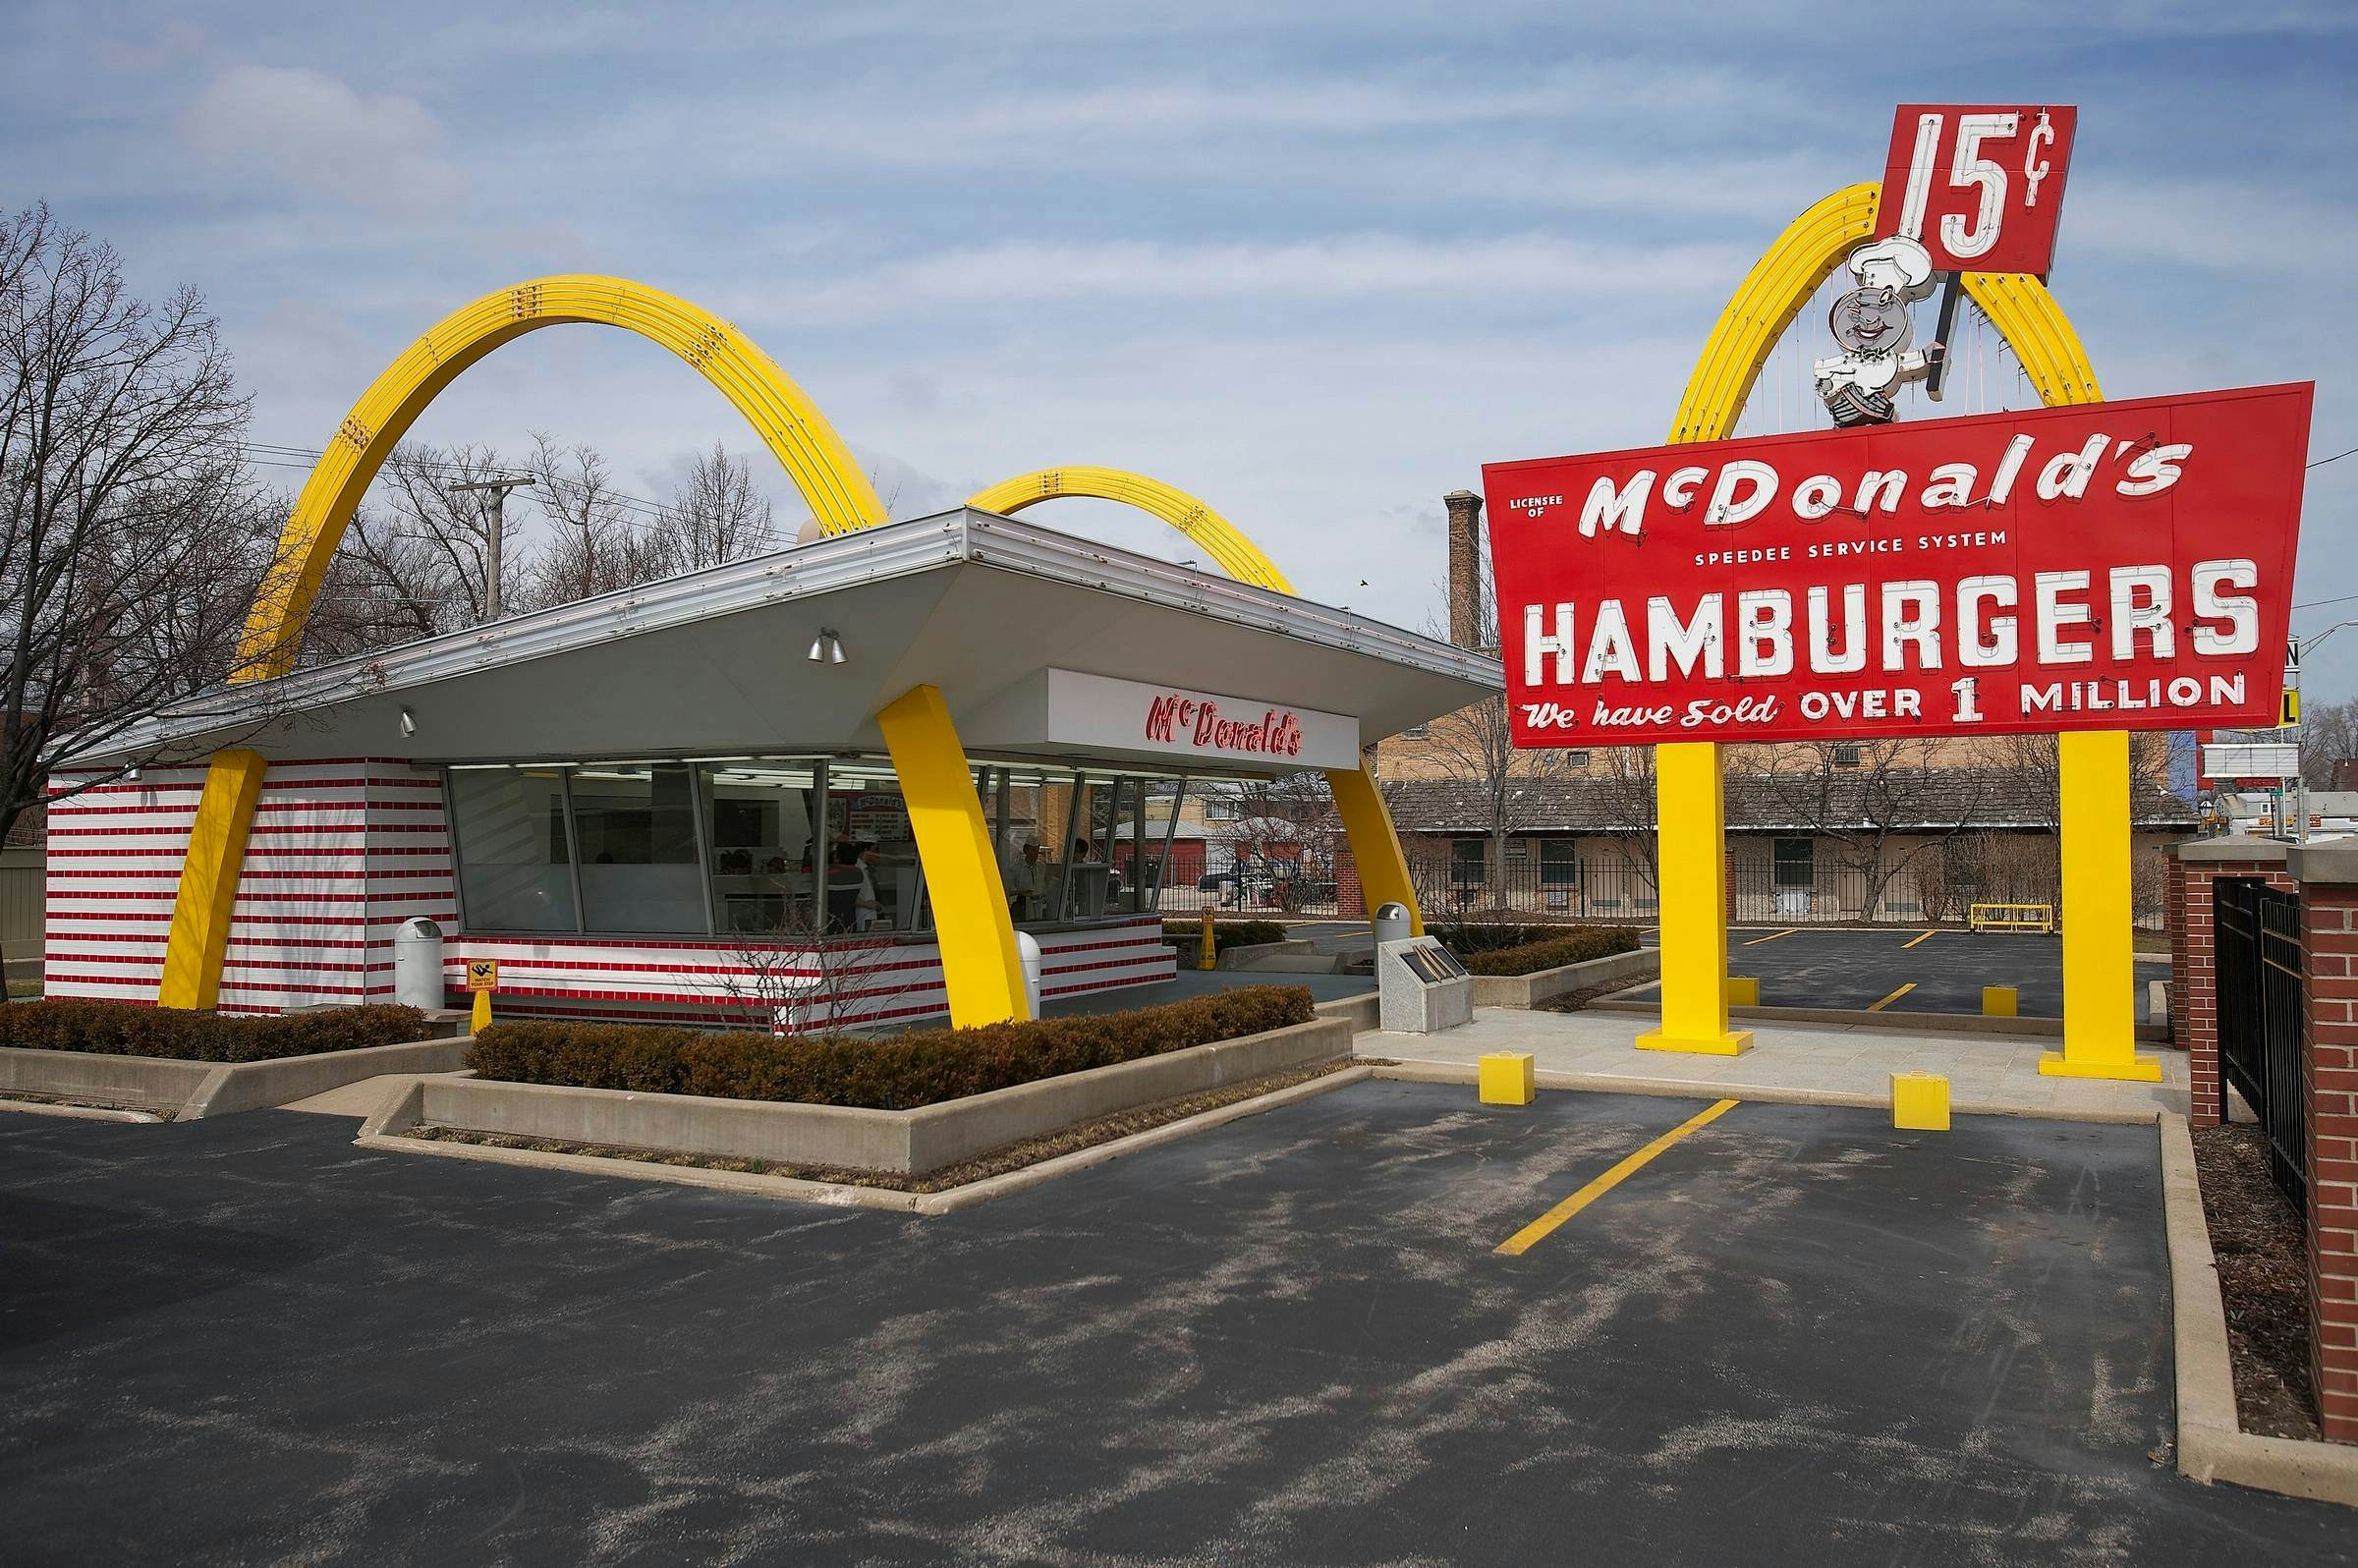 McDonald's opened by Ray Kroc